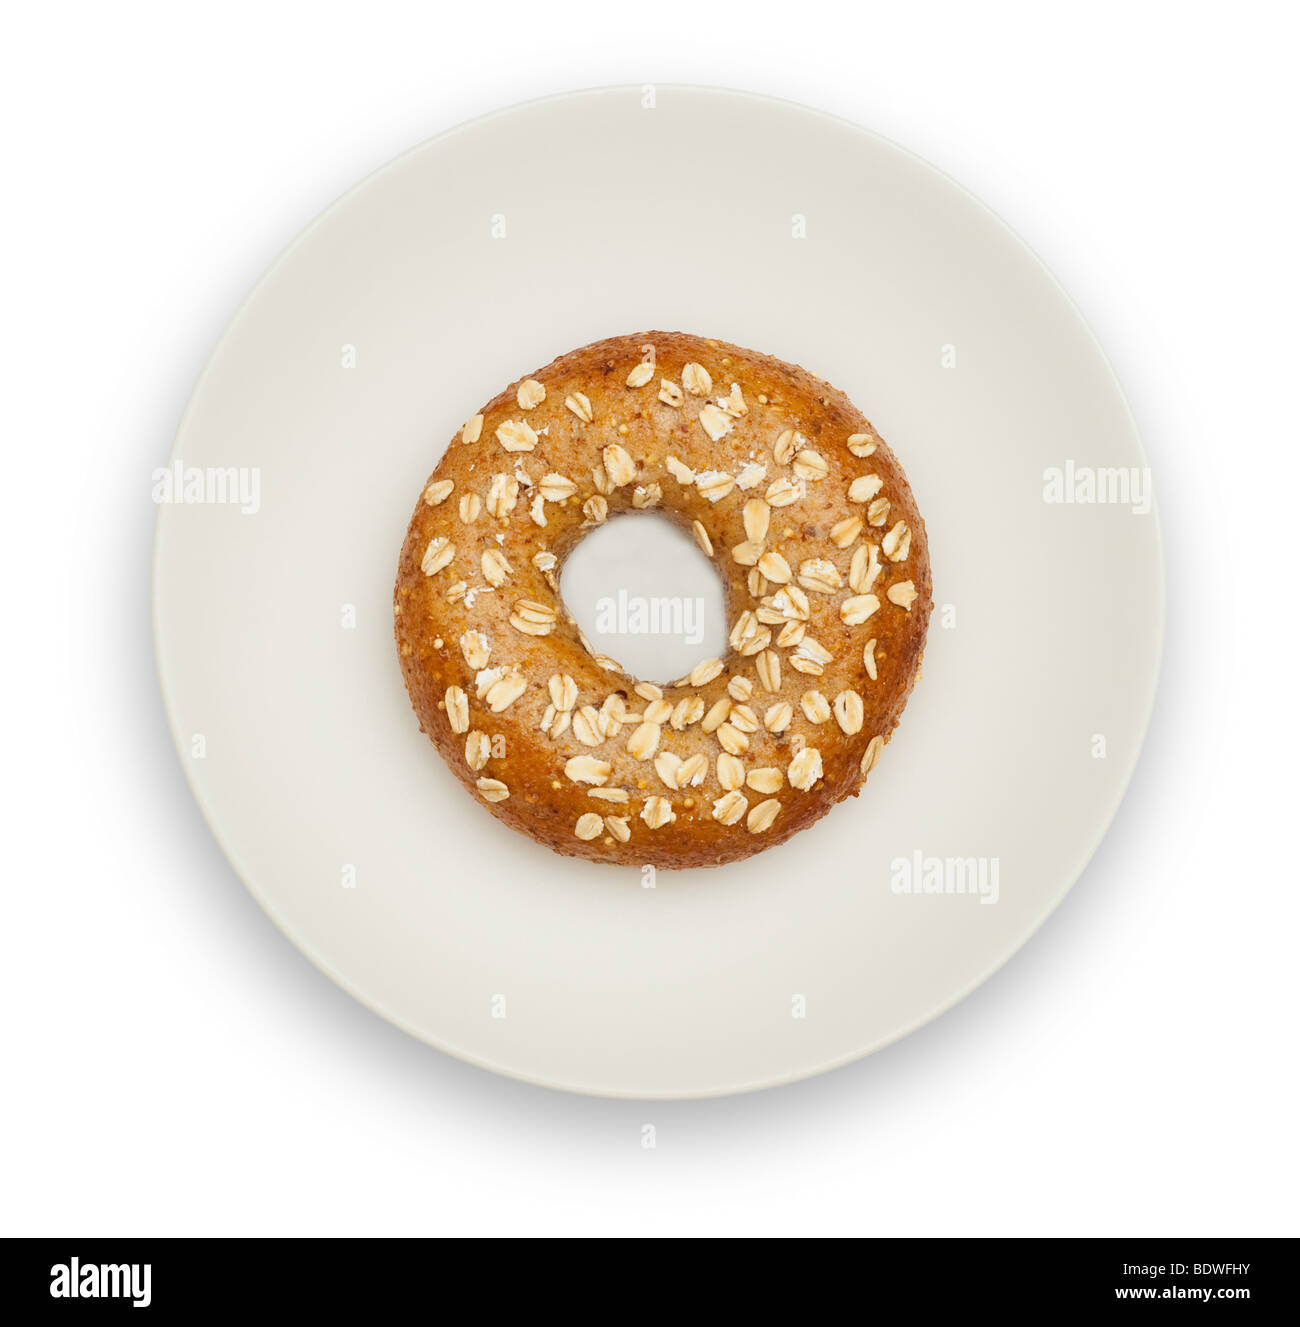 One Whole Grain Bagel on a White plate, isolated on white background. Saved with clipping path. Stock Photo